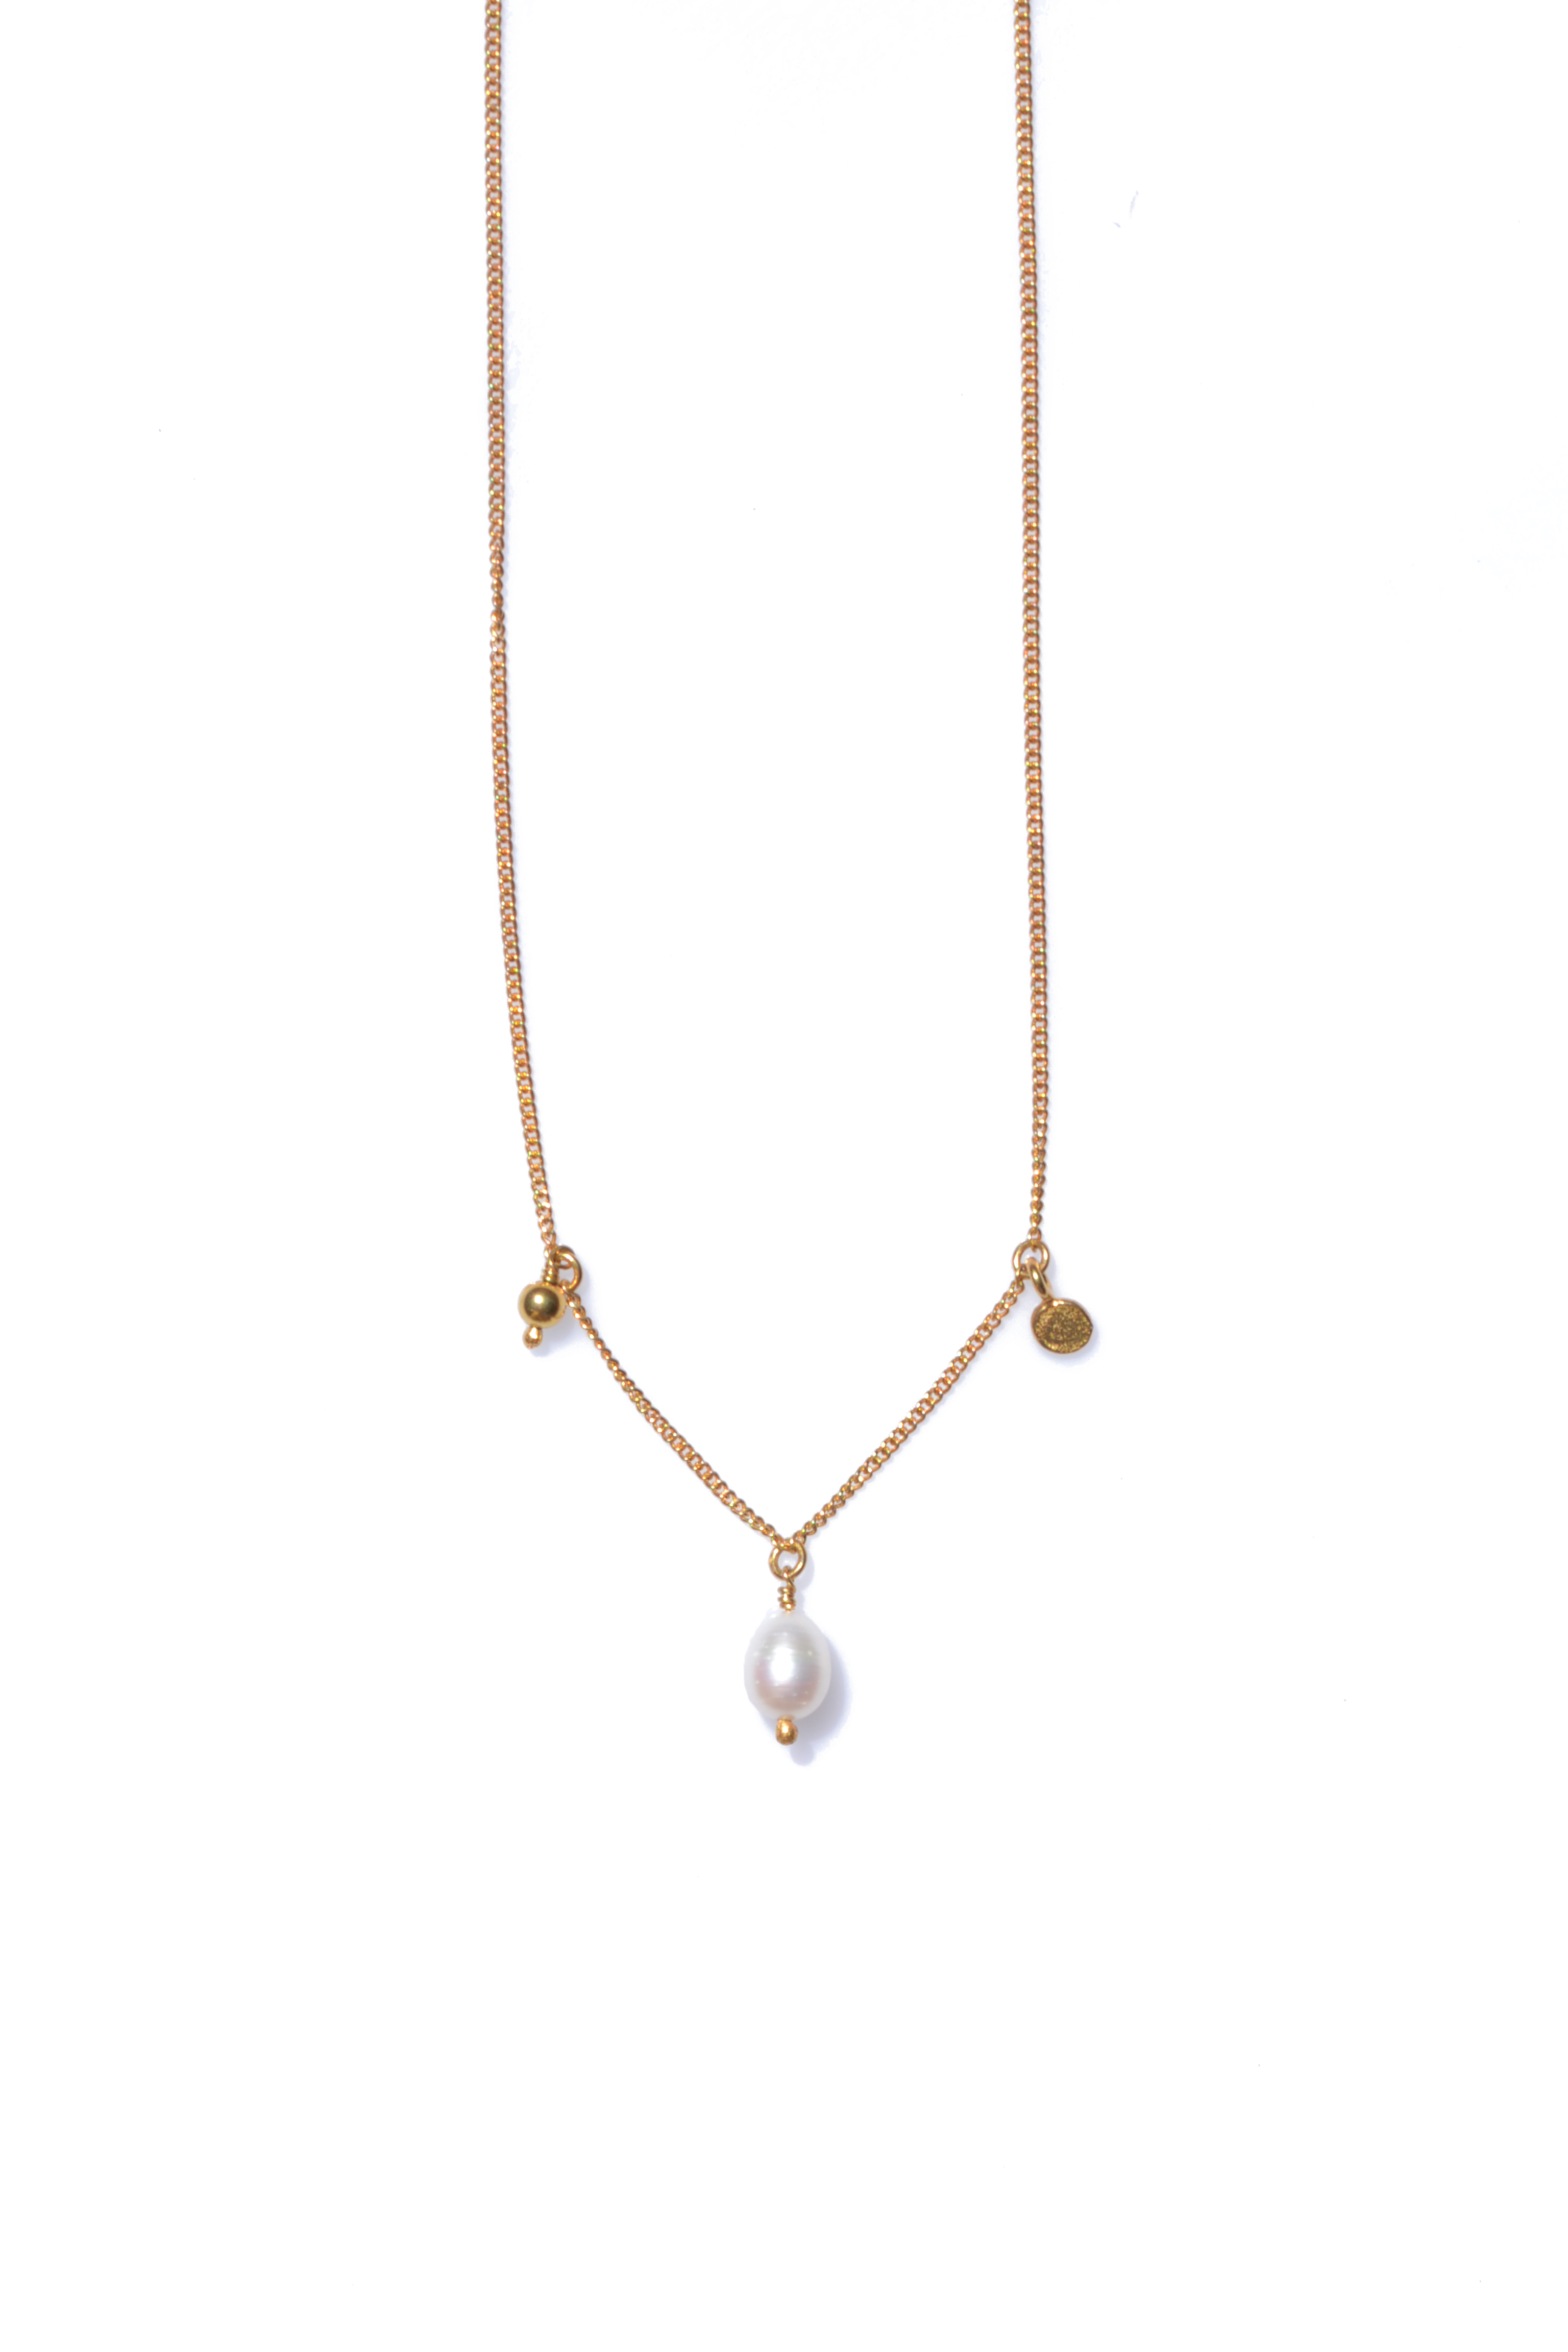 THE OTHER SIDE | Romi Necklace | $149